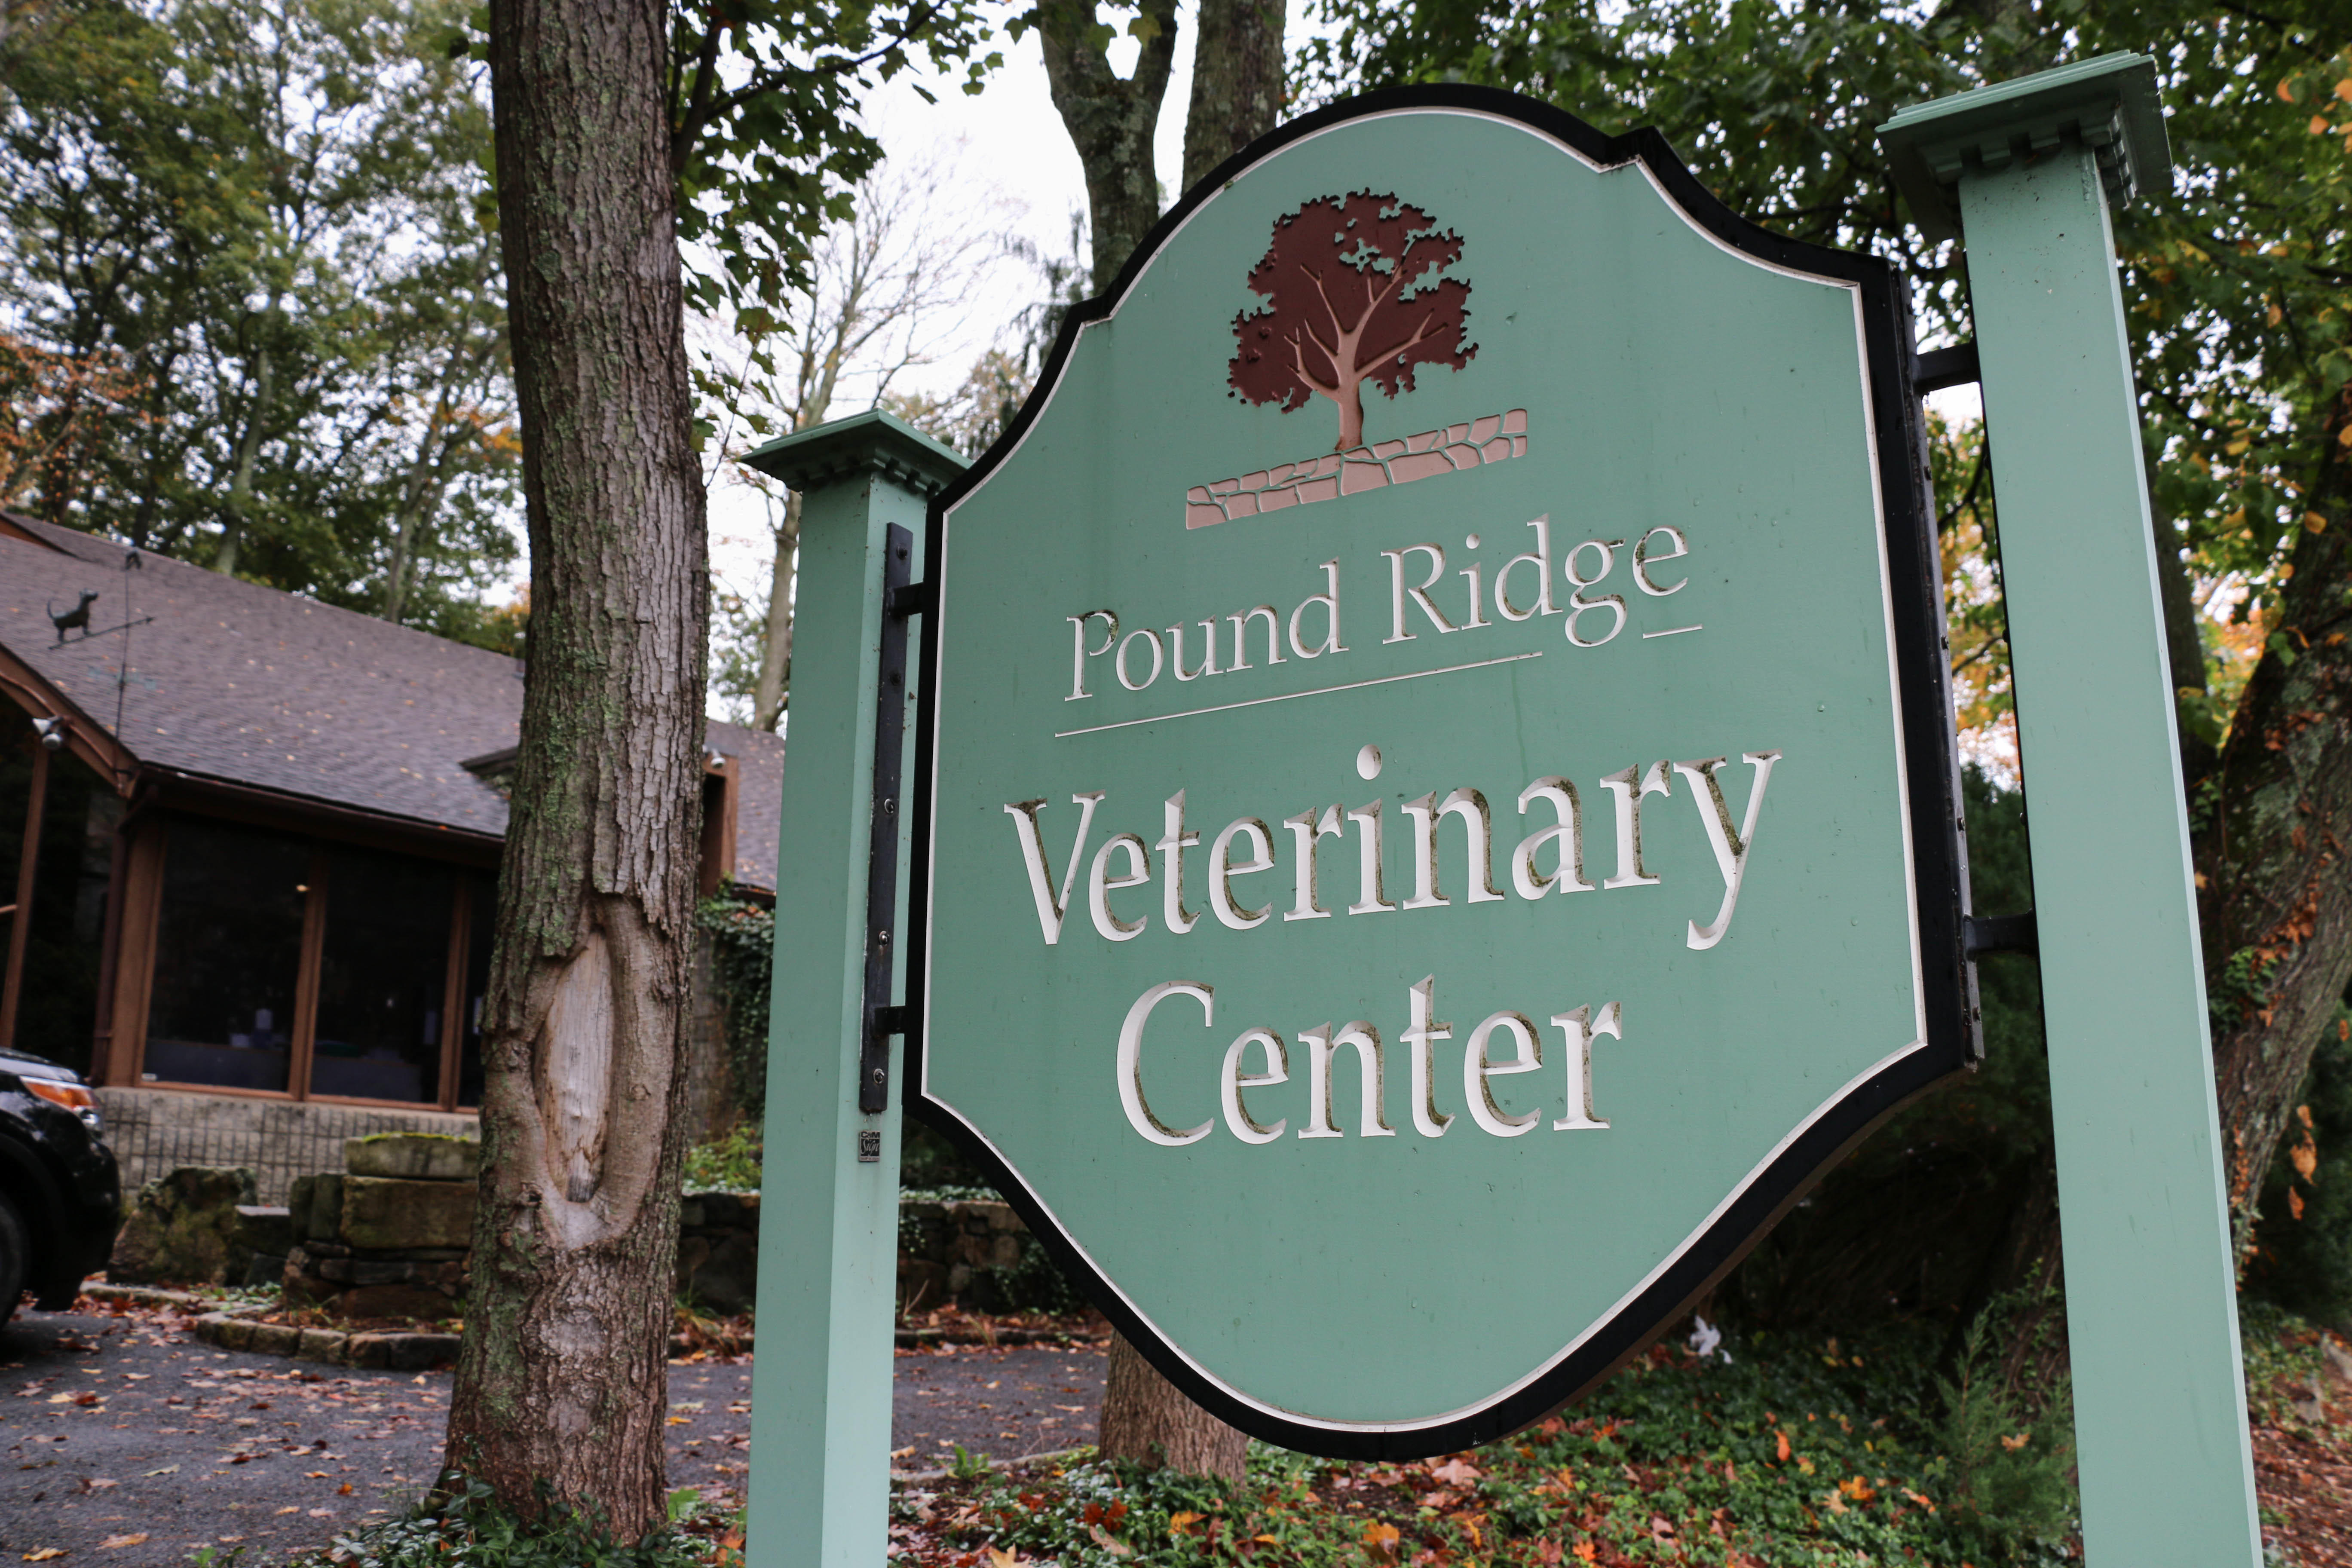 Pound Ridge Veterinary Center cares for dogs, cats and small mammals with full-service and comprehensive veterinary medicine.